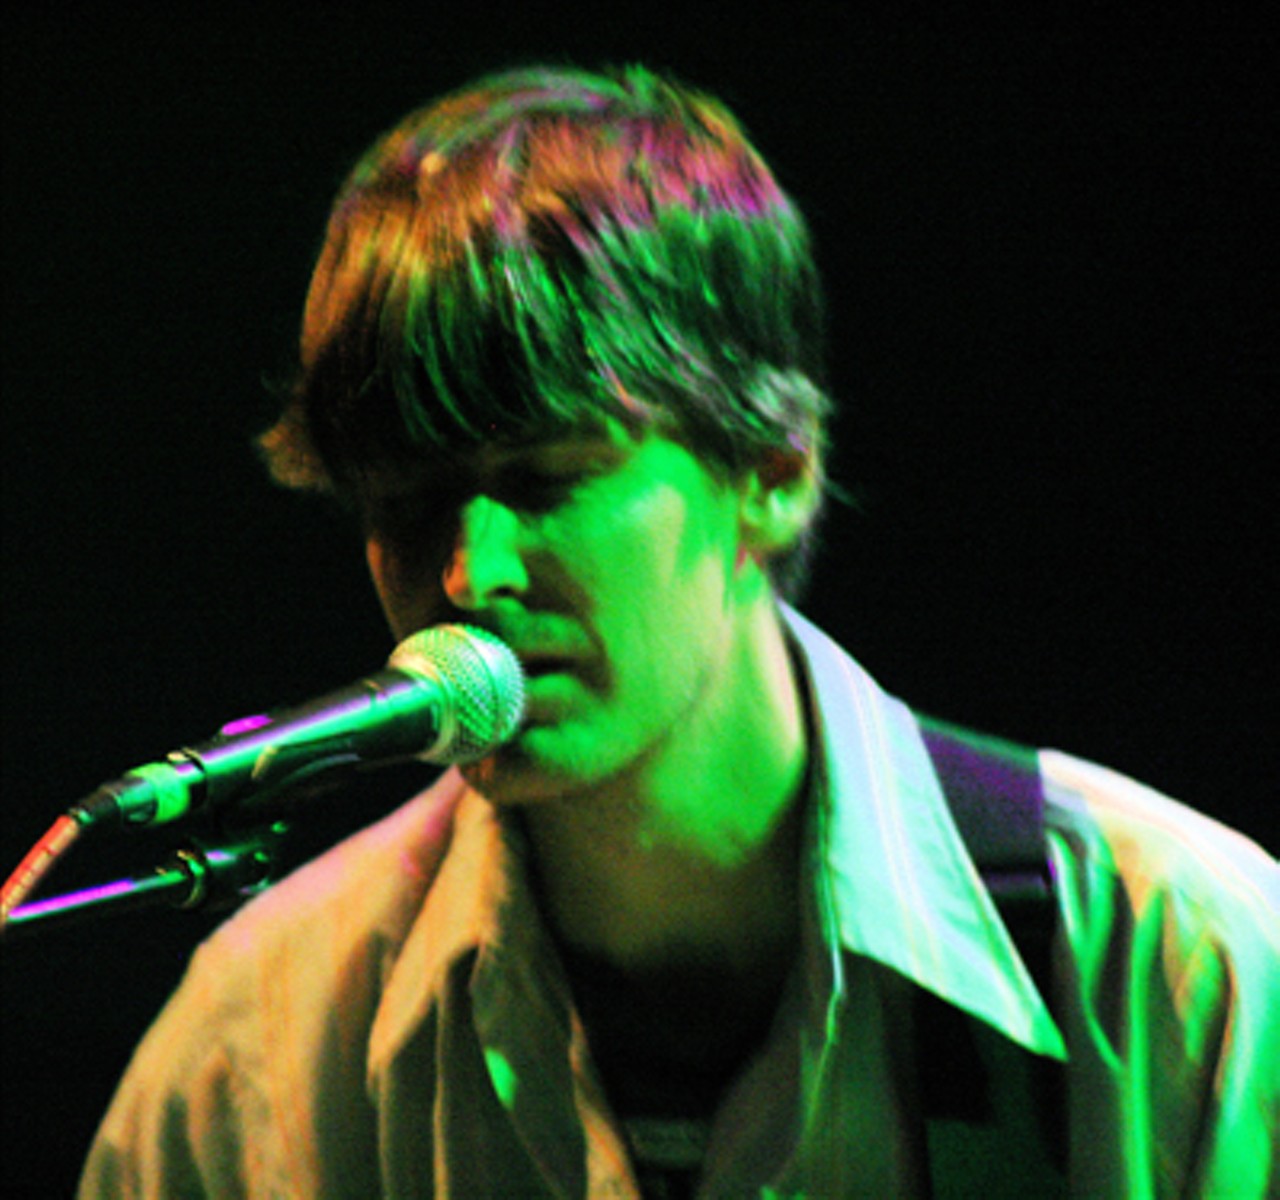 Stephen Malkmus, lead vocalist and guitar. Read the Stephen Malkmus concert review in A to Z